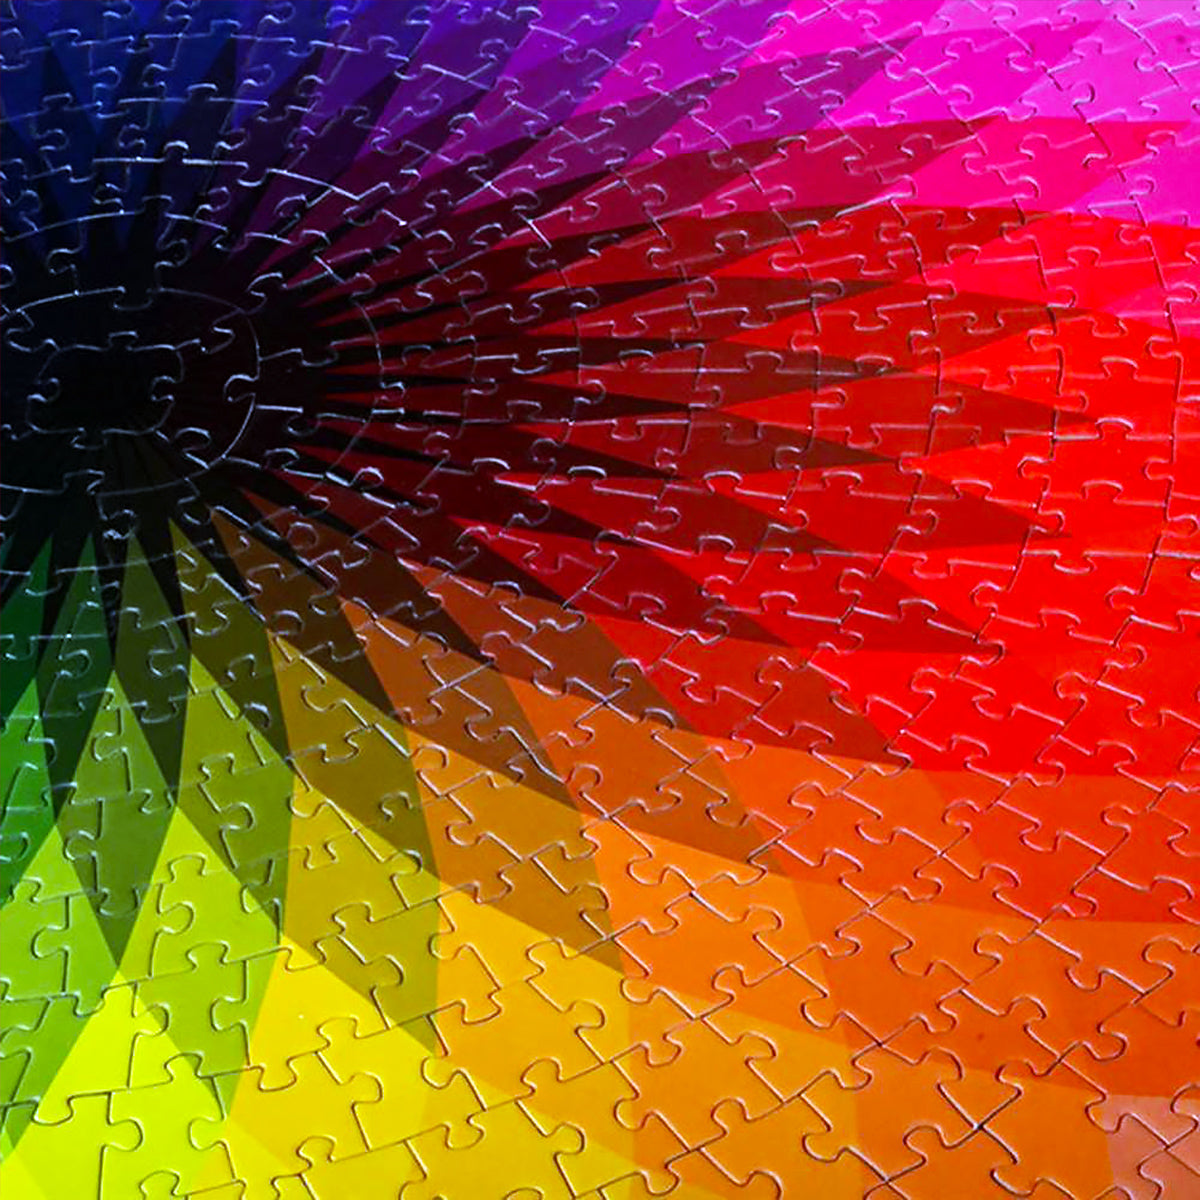 If you're used to starting with the corners, this 1,000-piece round jigsaw puzzle will give you a run for your money. And the gradual rainbow colour gradient is just subtle enough to make it even more difficult.